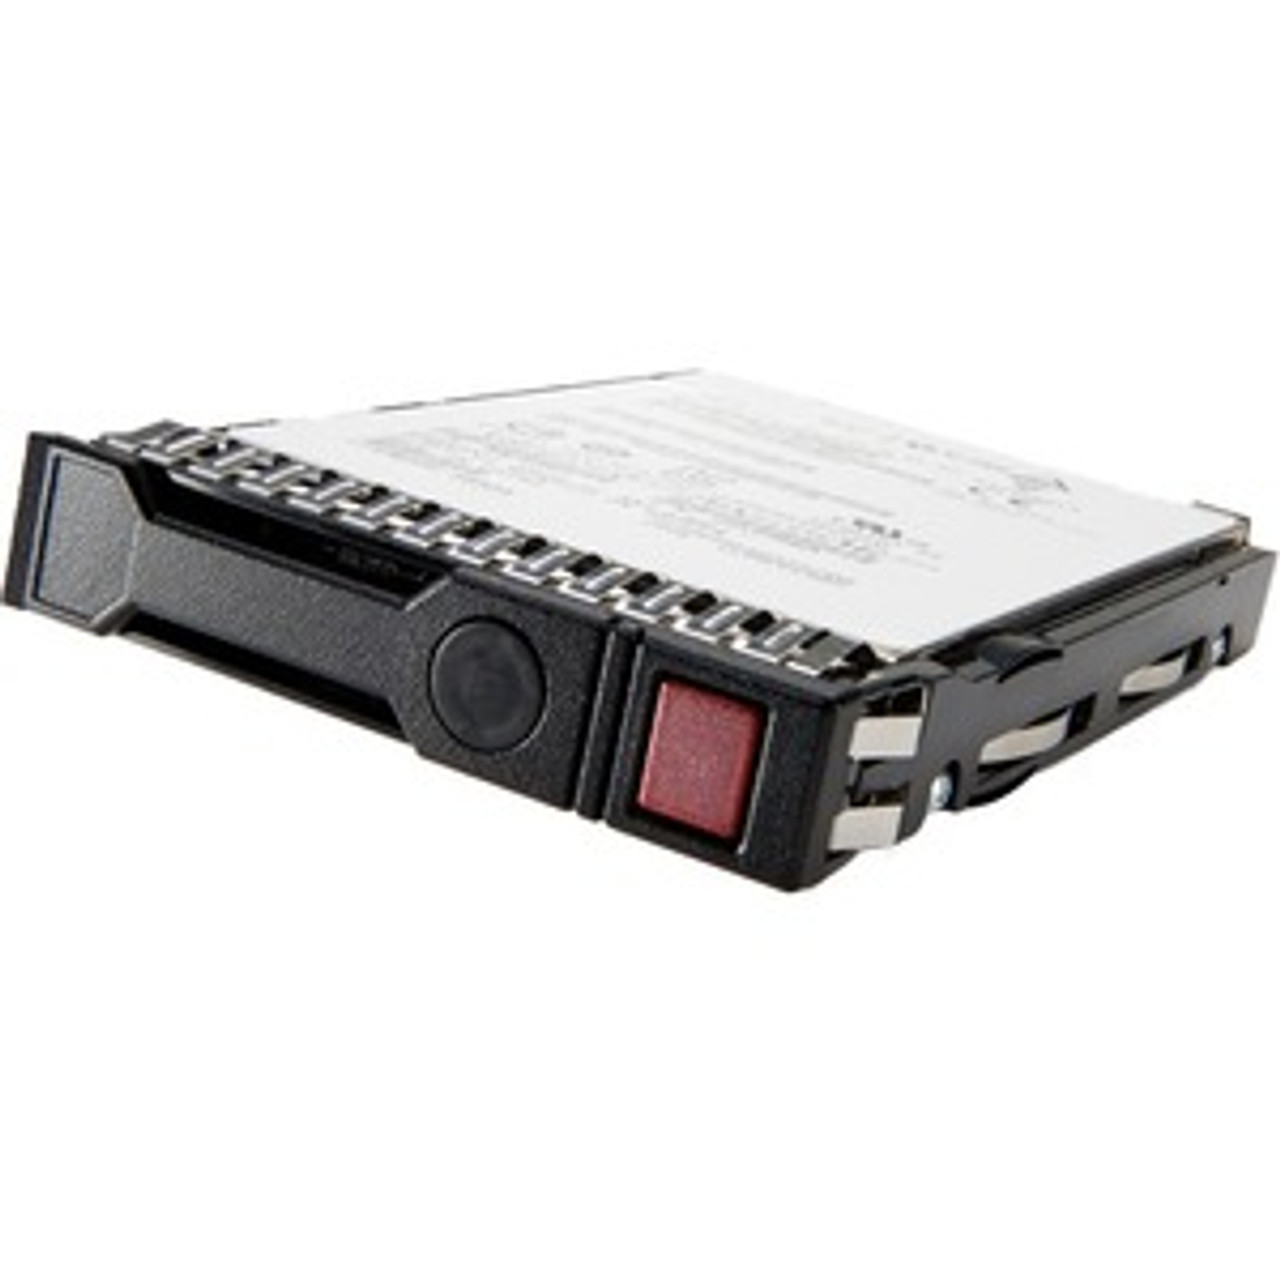 P26362-H21 HPE 6.4TB SAS 12Gbps Mixed Use 2.5-inch Internal Solid State Drive (SSD)